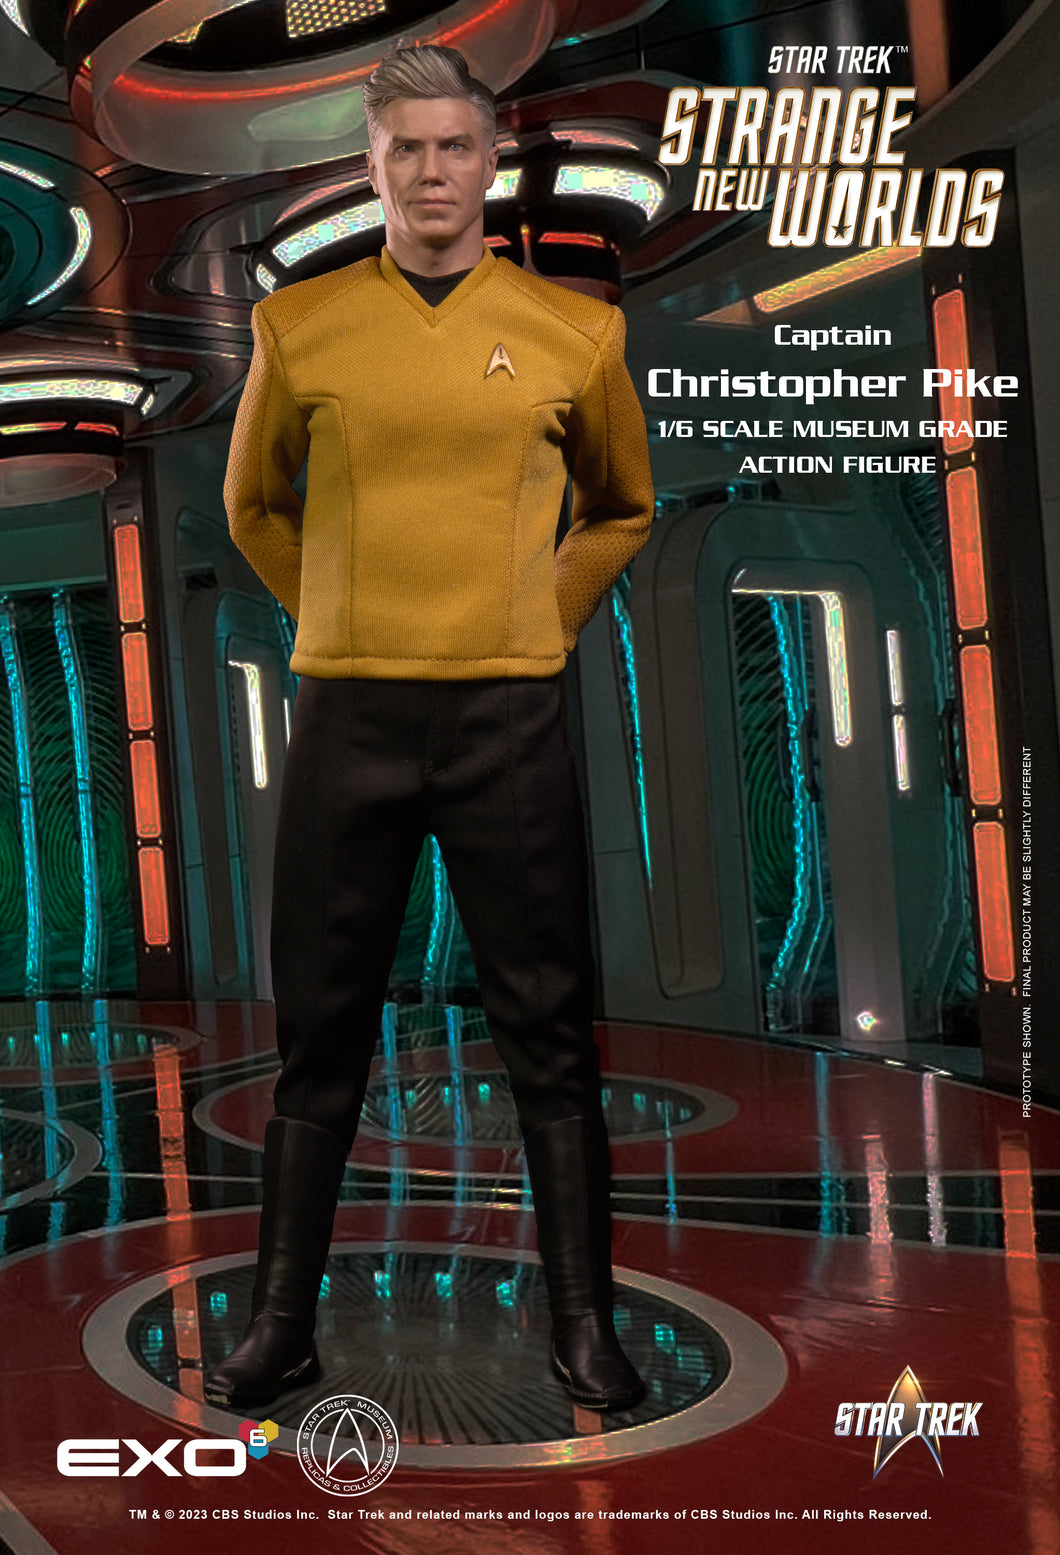 SNW Captain Christopher Pike  NON REFUNDABLE US$20.00 PRE-ORDER DEPOSIT (Final Amount due $225 + $25 shipping) Pre-Order Ended